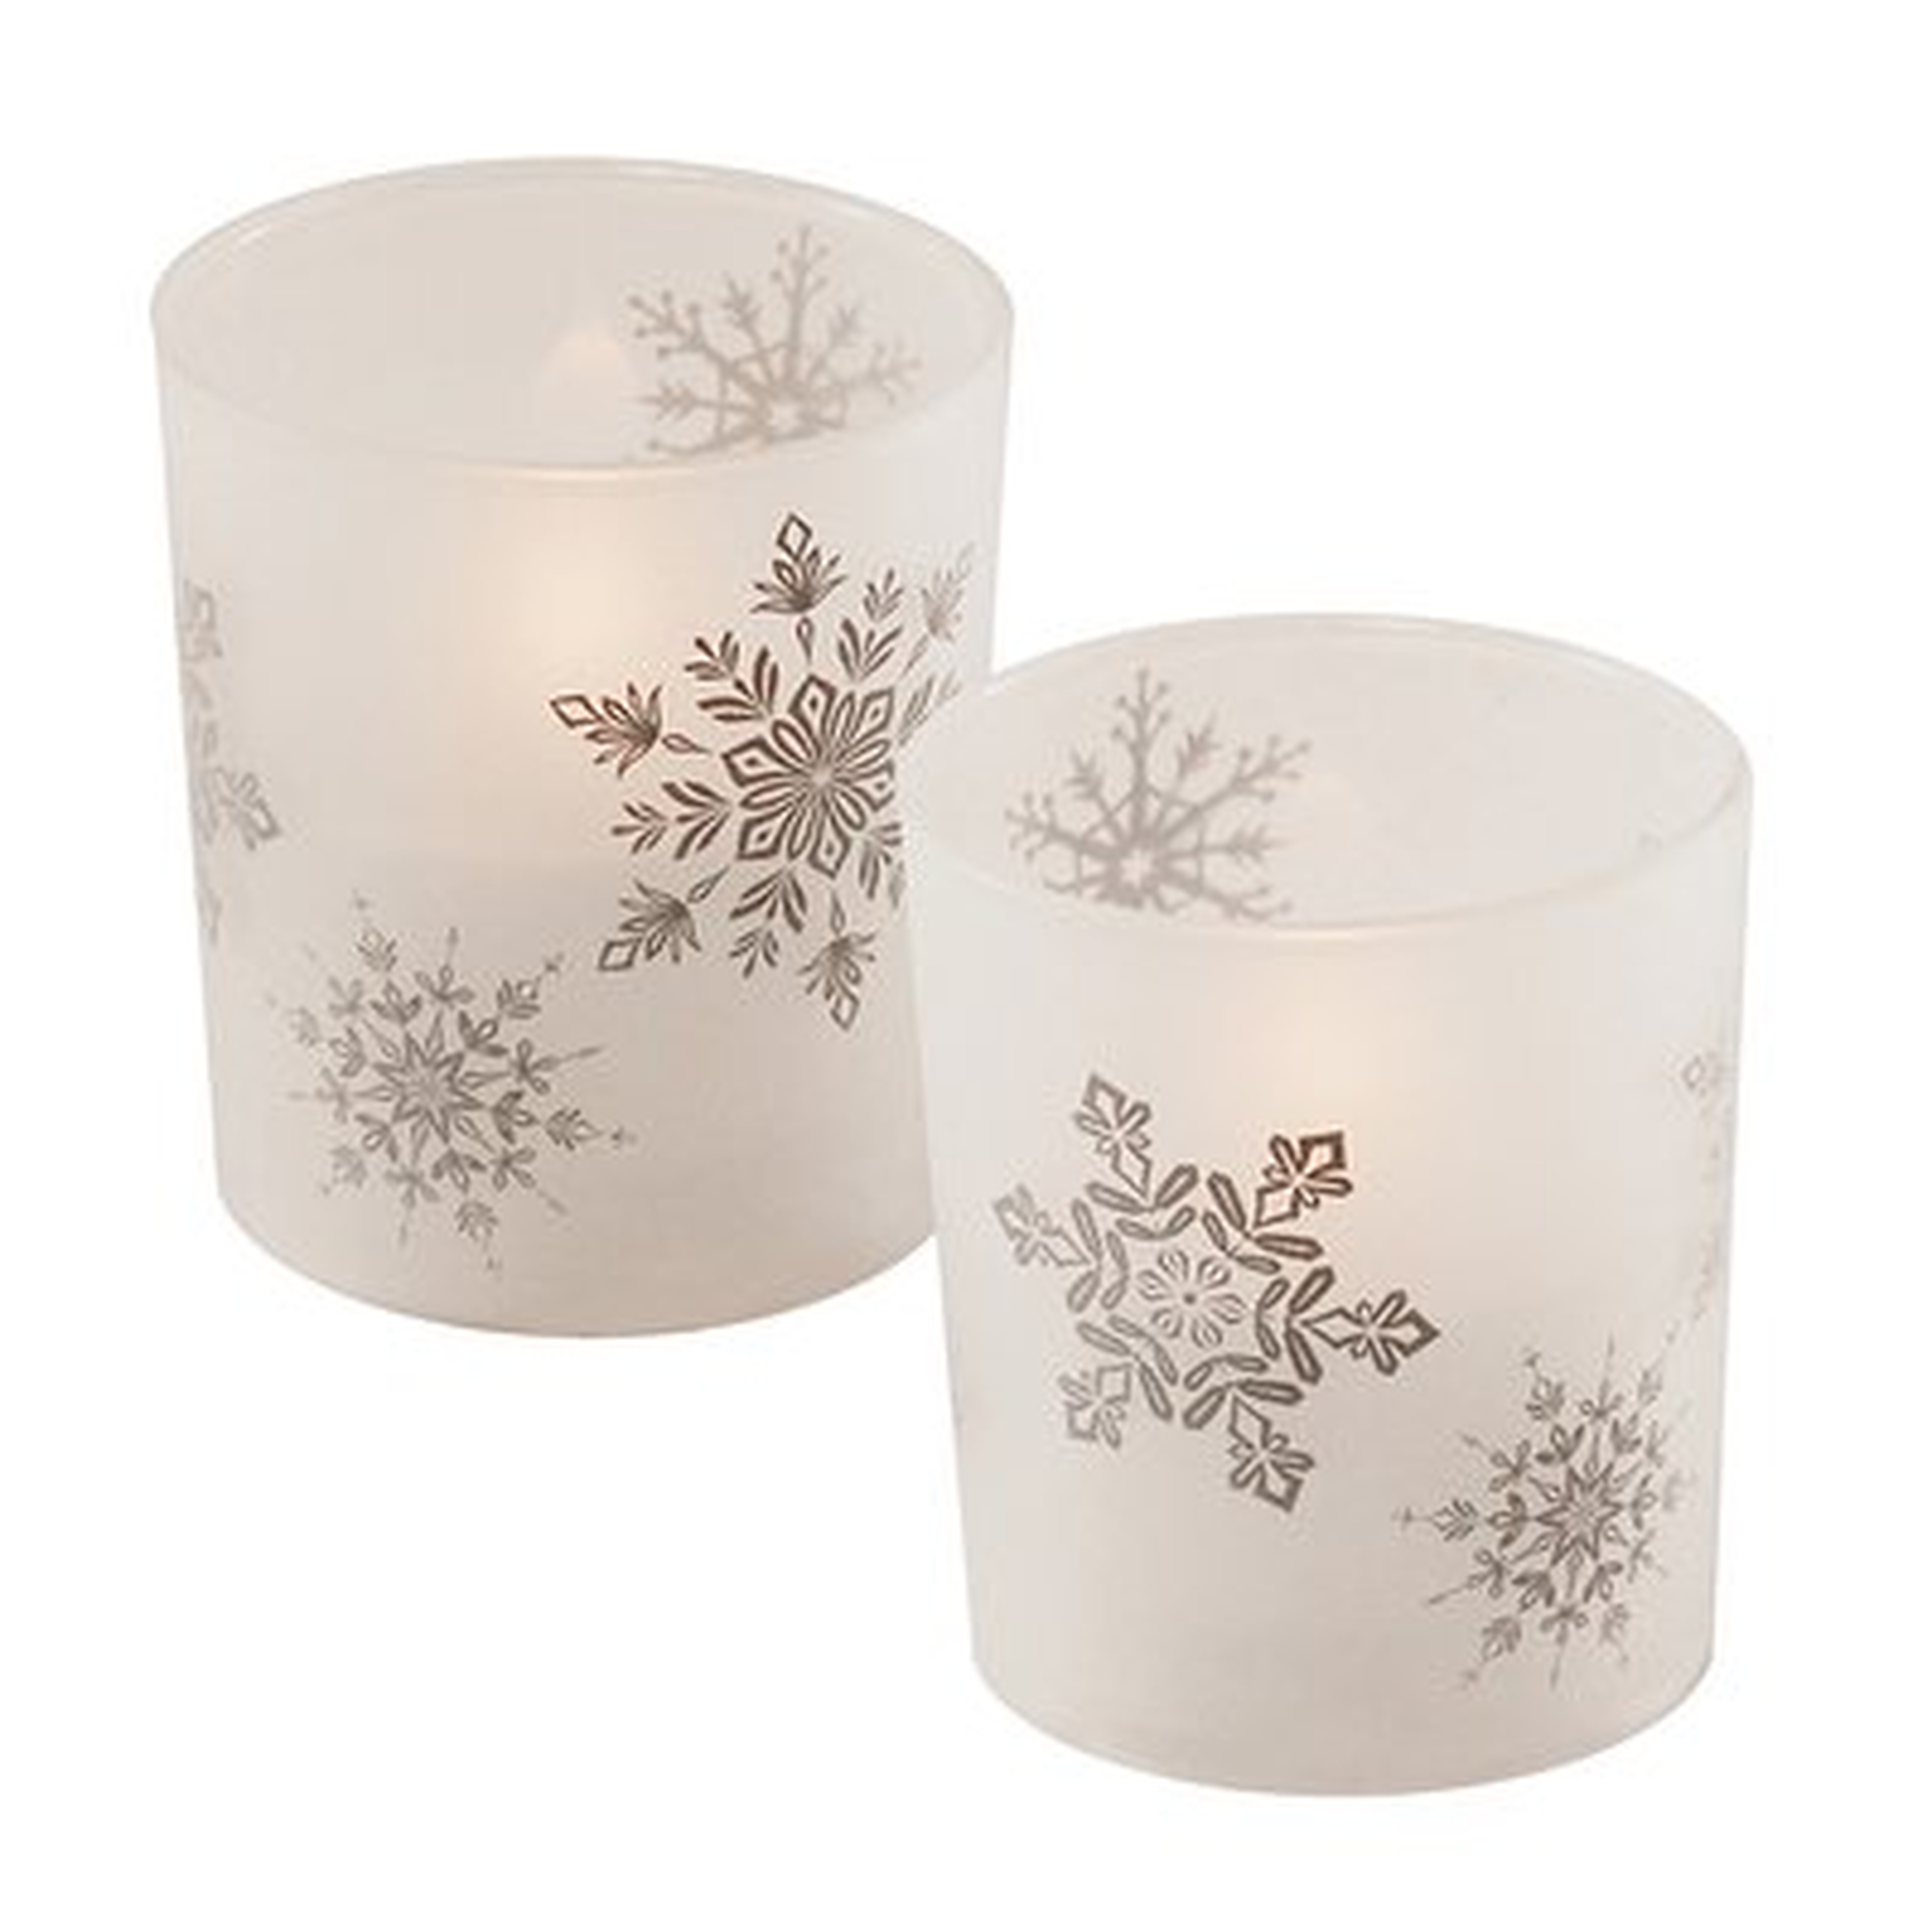 Snowflakes Glass Unscented Candle - Wayfair